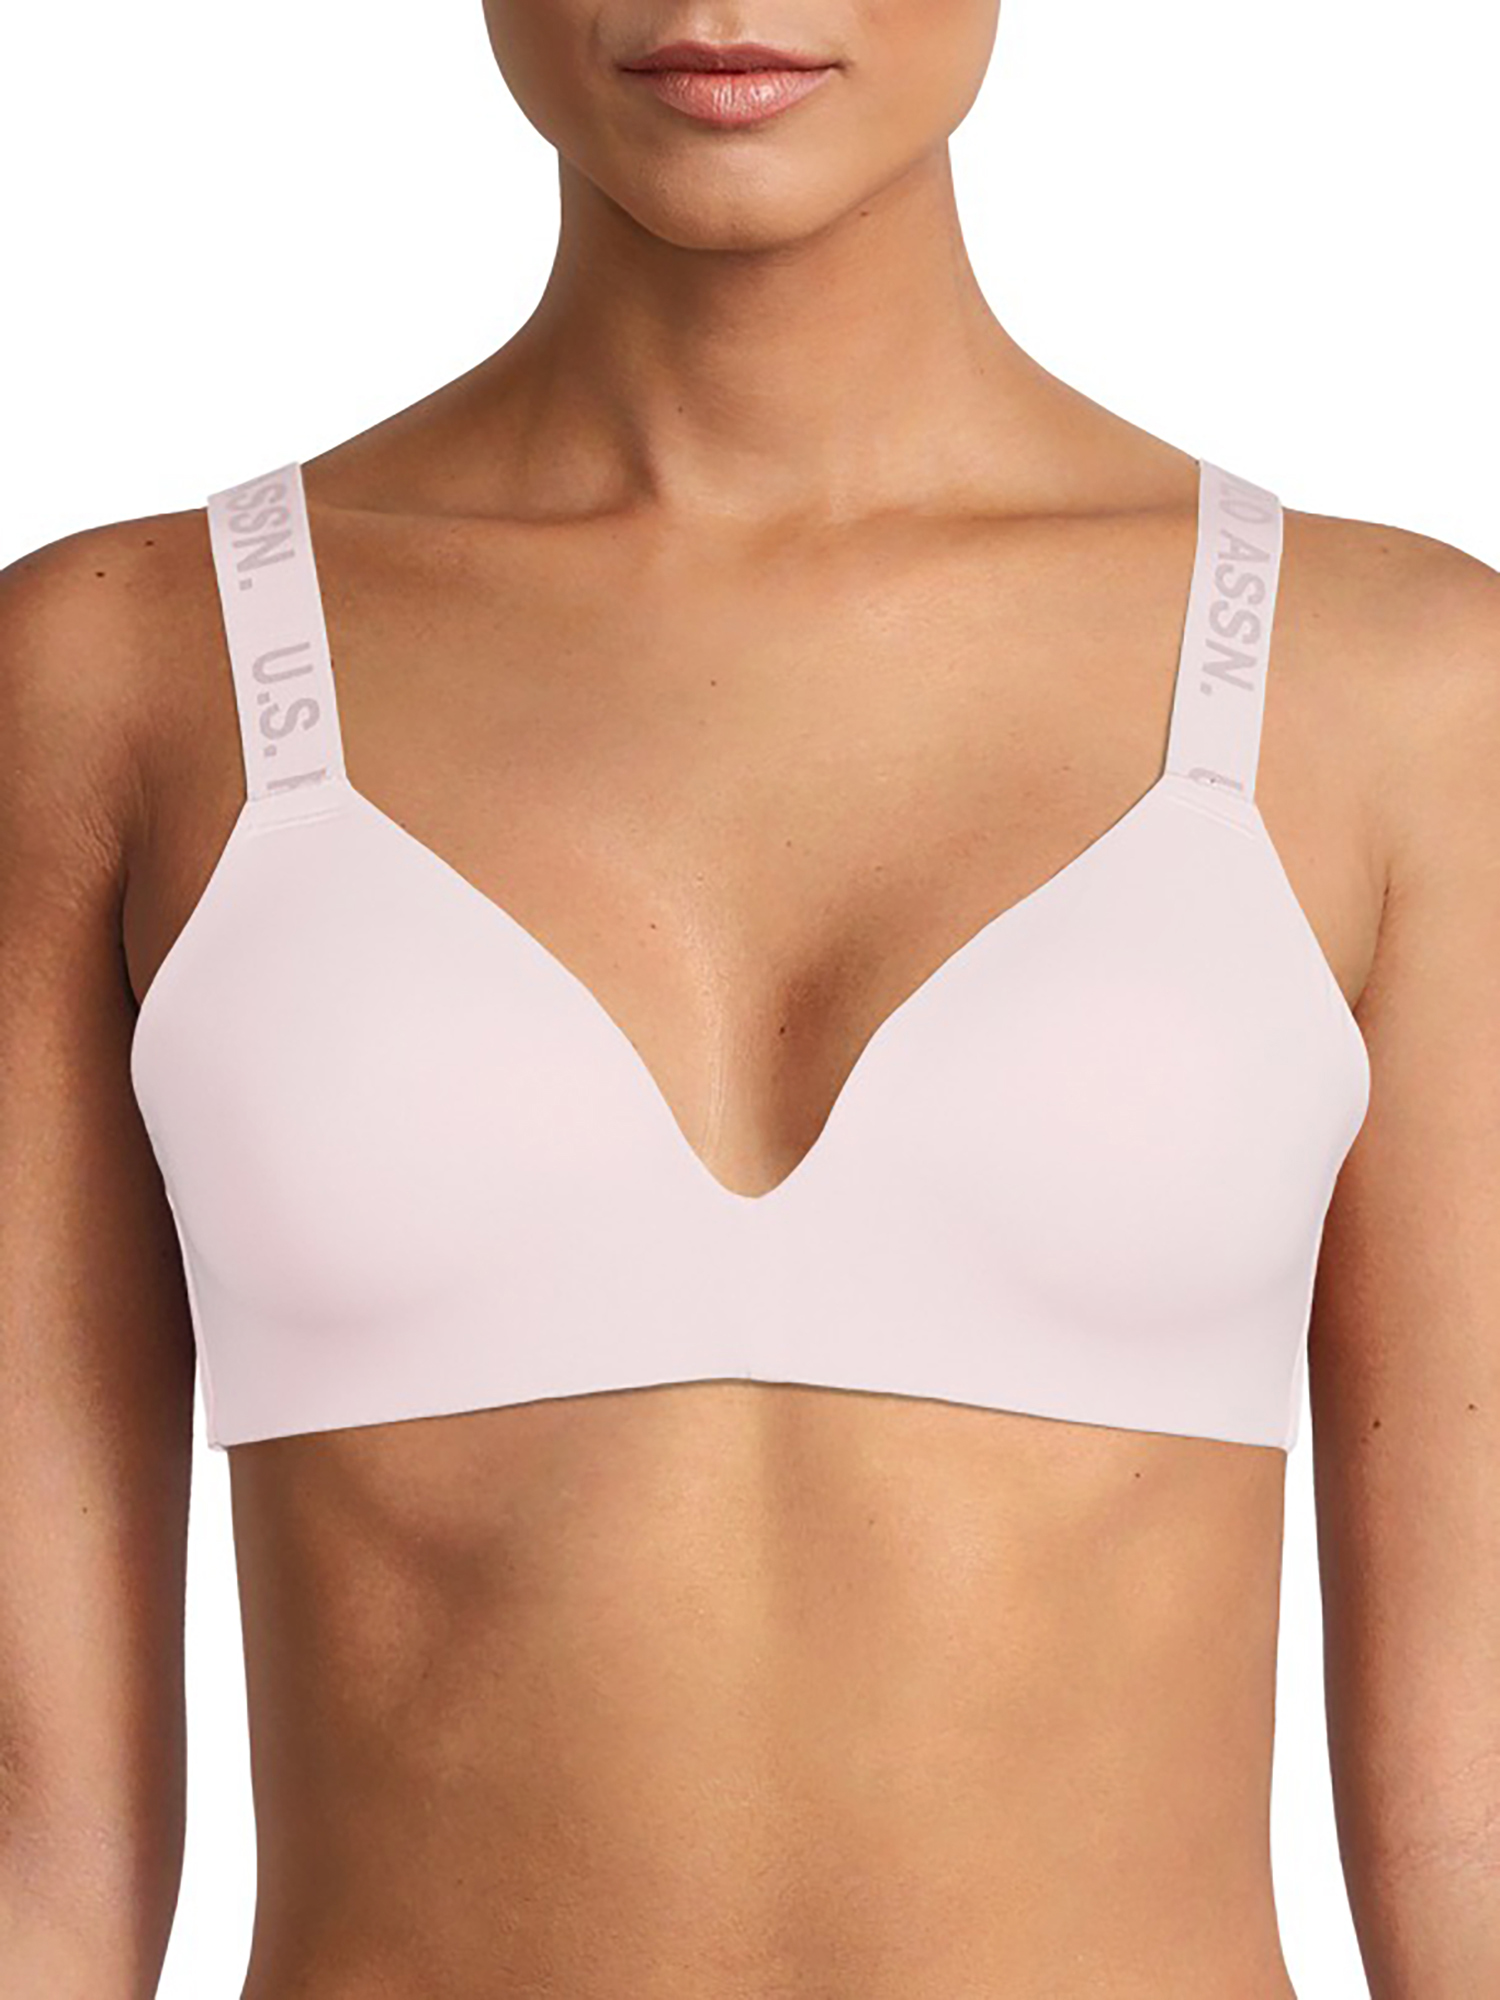 U.S. Polo Assn. Women's Wirefree Push Up Bra, 2-Pack - image 2 of 4